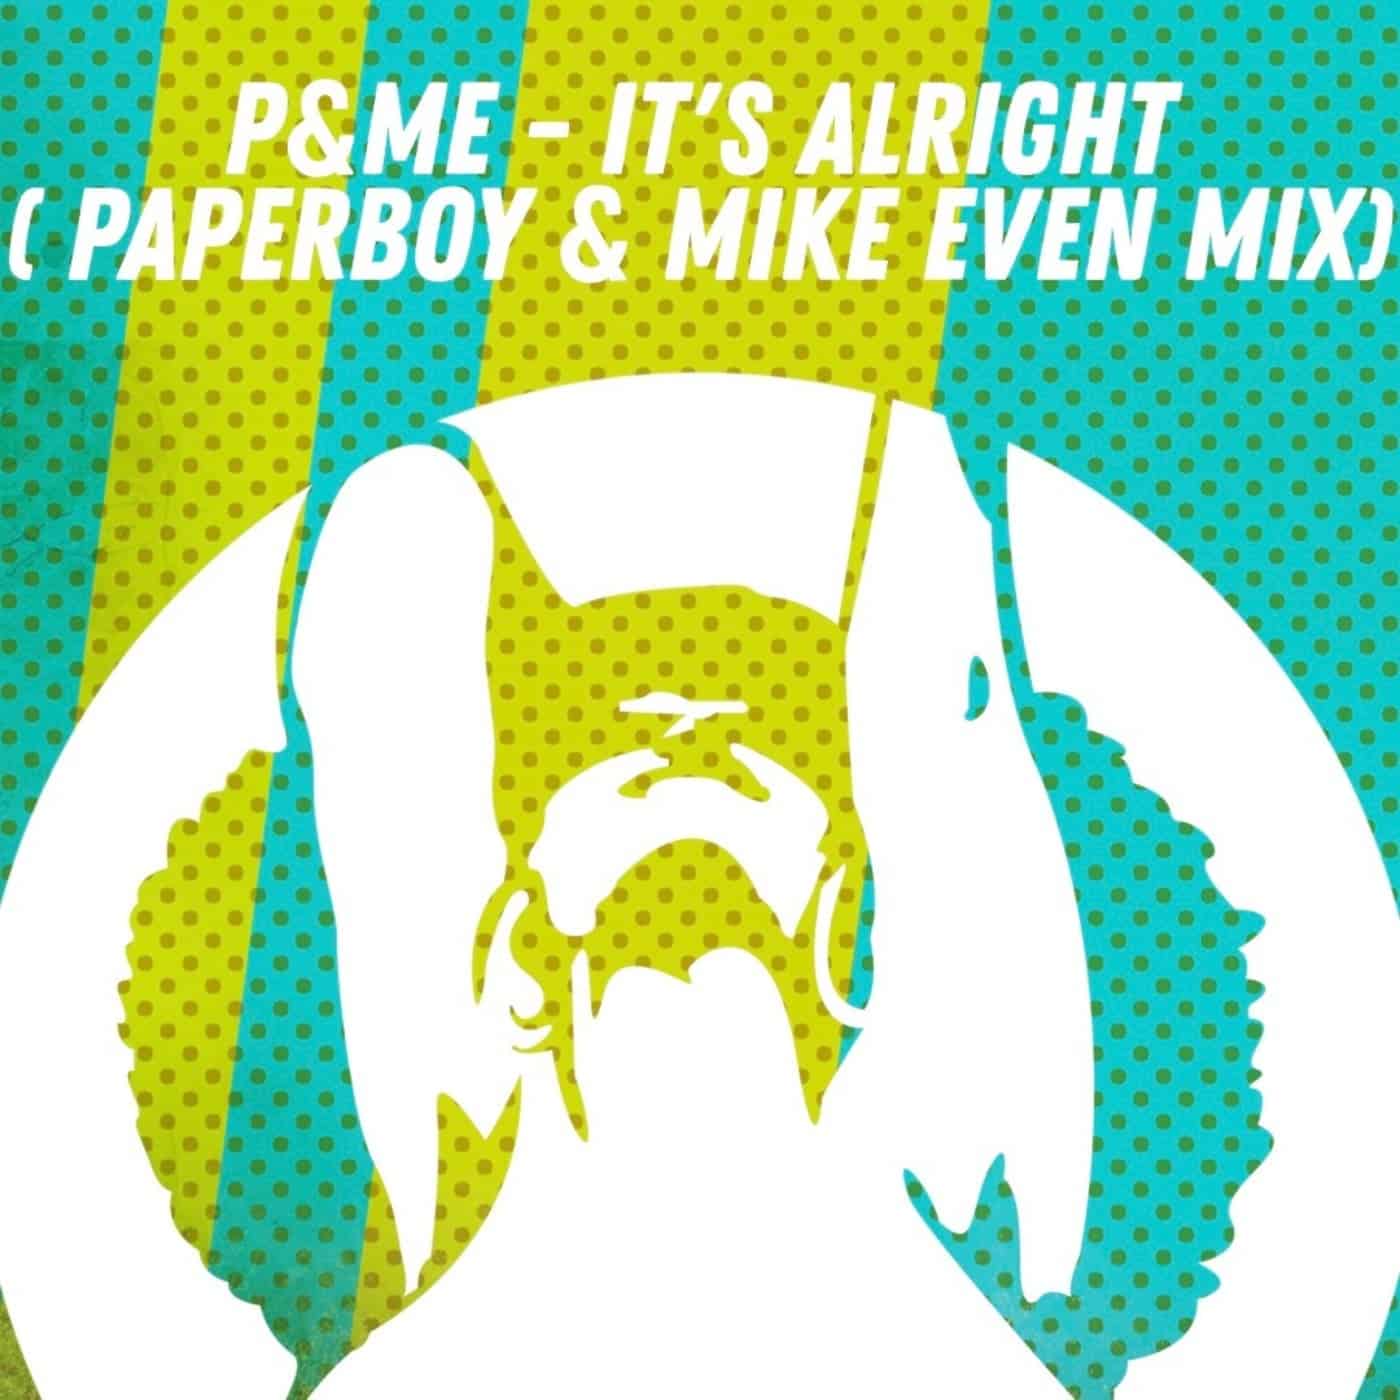 Download P & ME - It's Alright on Electrobuzz